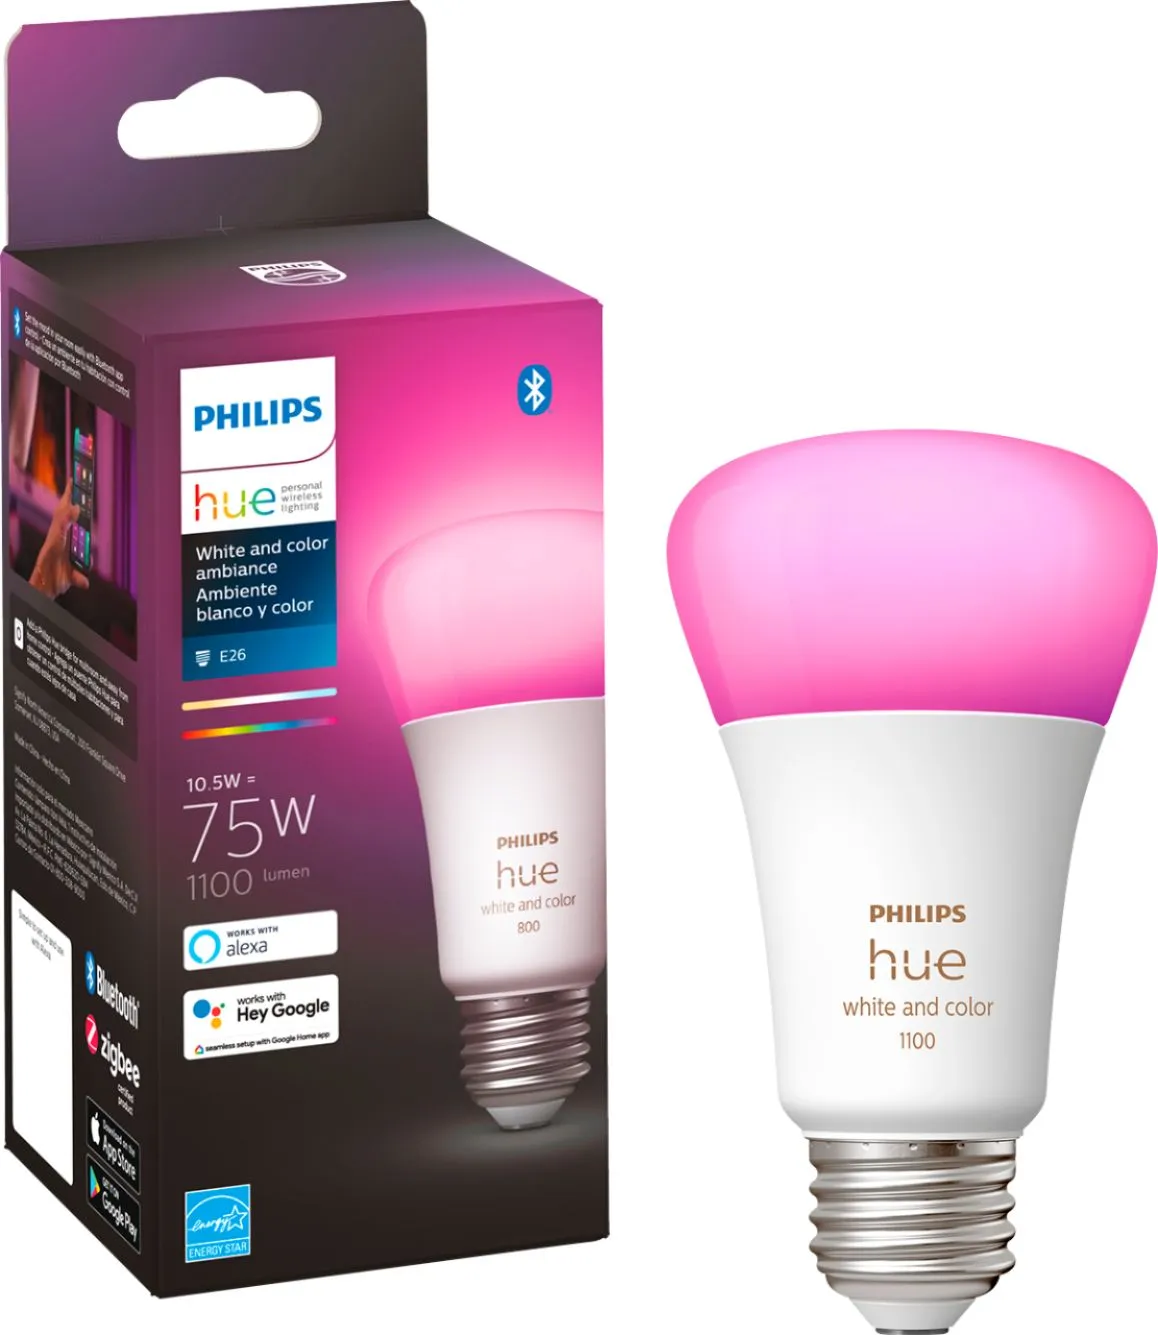 Hue White and Color Ambiance A19 E26 1100lm